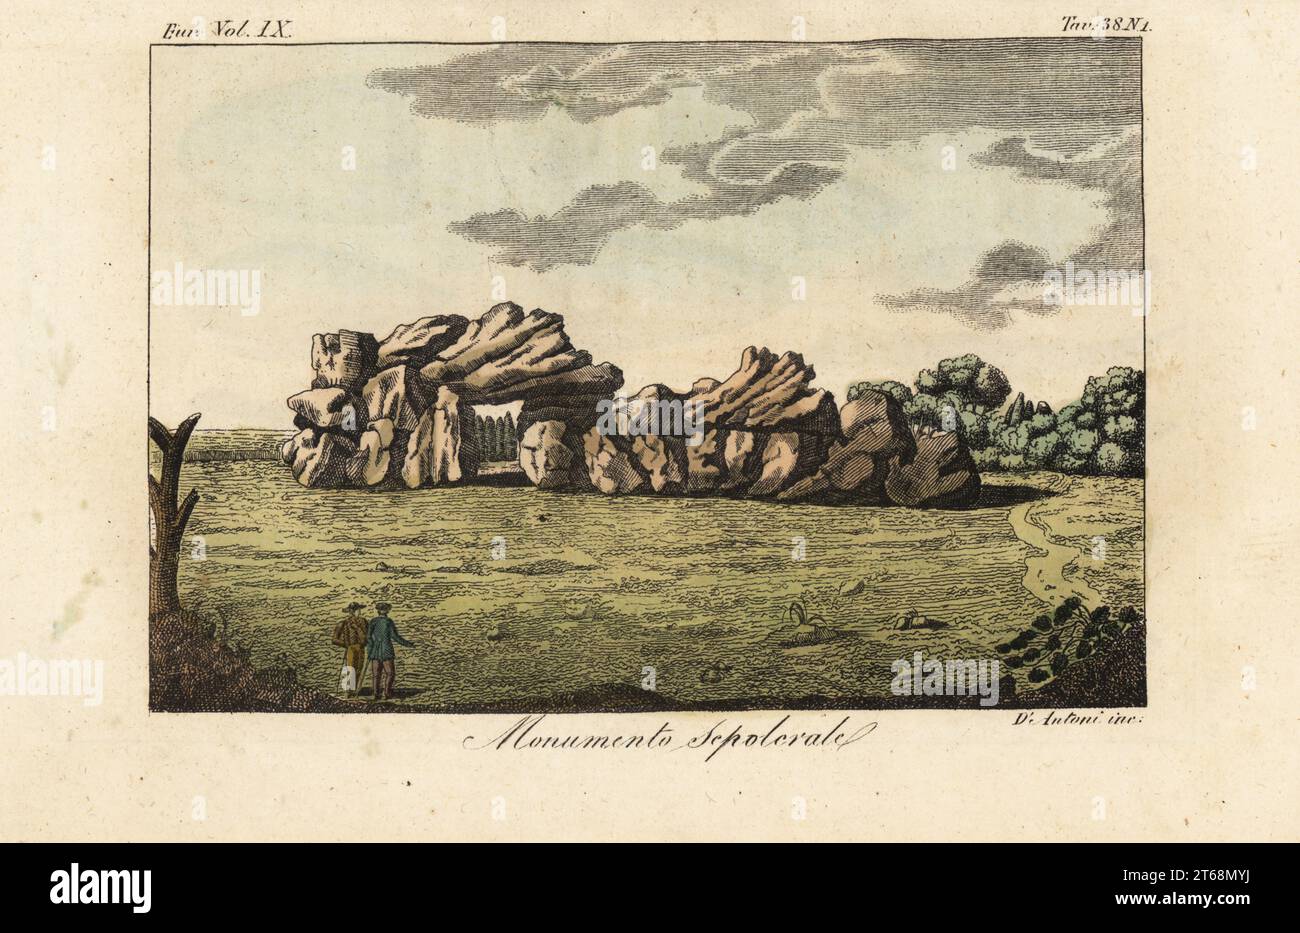 Ancient sepulchral monument in Germany. Stone megalith structure of the ancient Germanic people. Monumento Sepolcrale. Handcoloured copperplate engraving by Antoni from Giulio Ferrarios Costumes Ancient and Modern of the Peoples of the World, Il Costume Antico e Moderno, Florence, 1837. Stock Photo